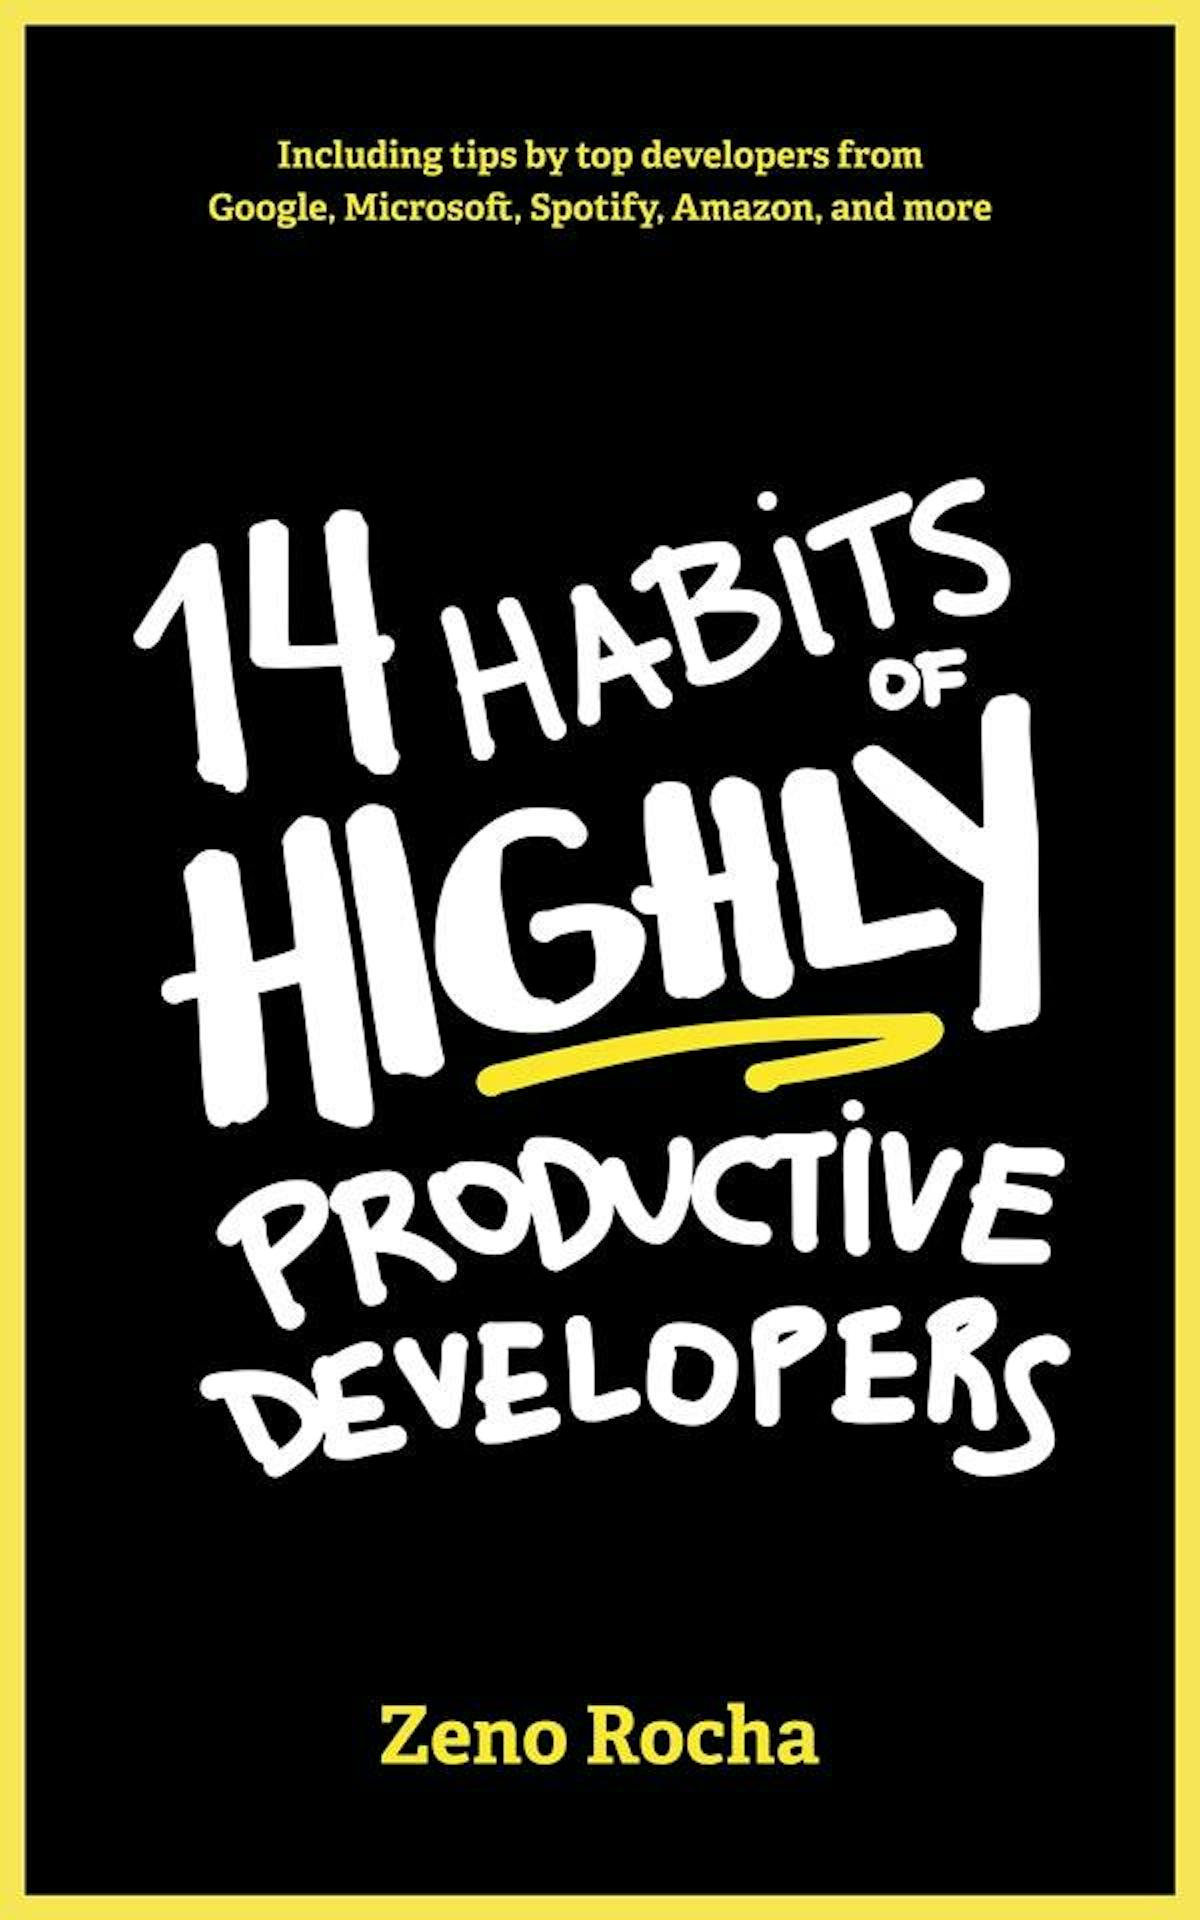 14 Habits of Highly Productive Developers book